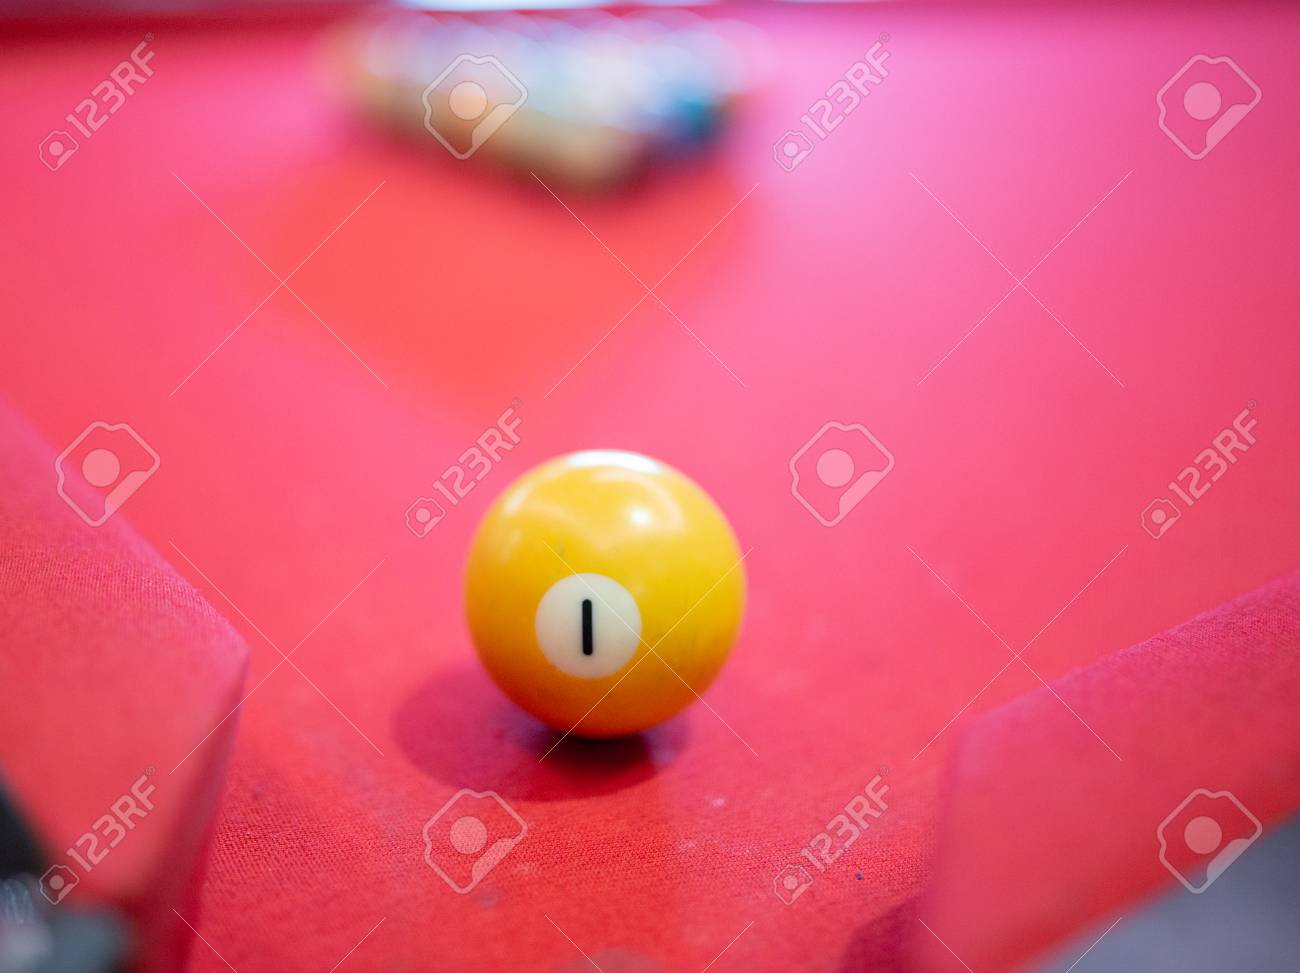 Billiard Ball On Red Table Background In Pub Bar Room Concept